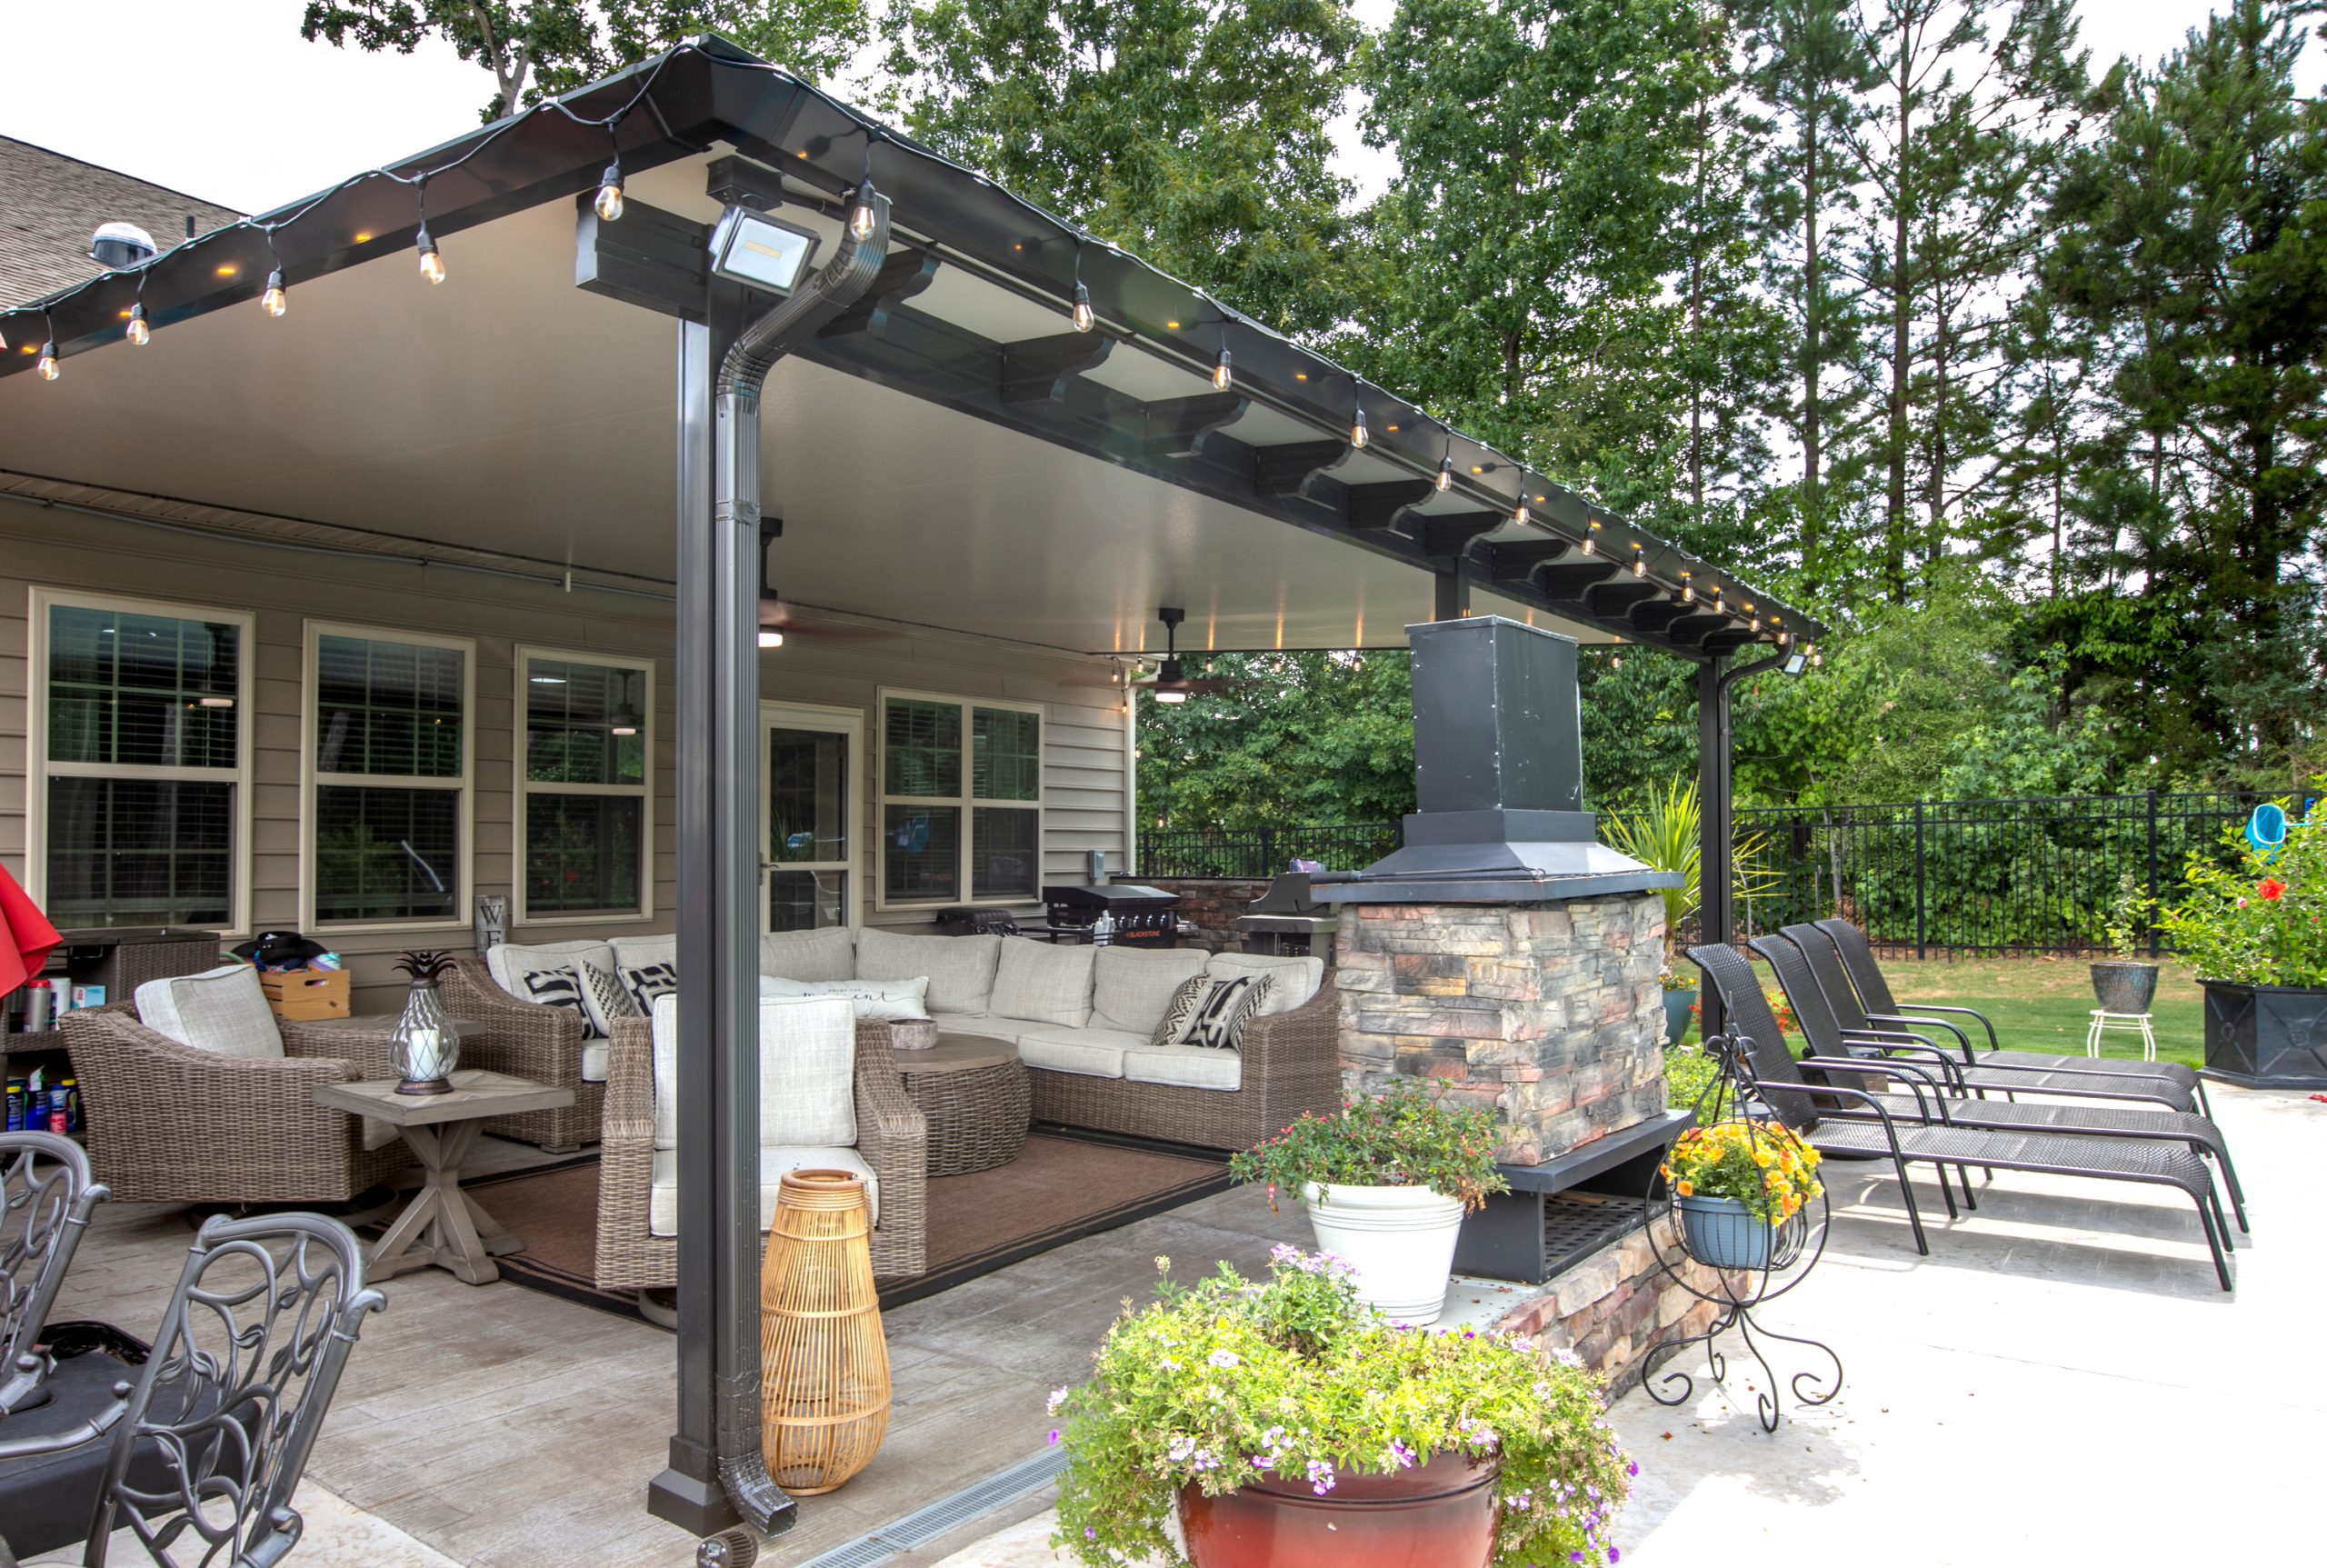 Renaissance Patio Products Contempo Insulated Patio Cover Patio Cover